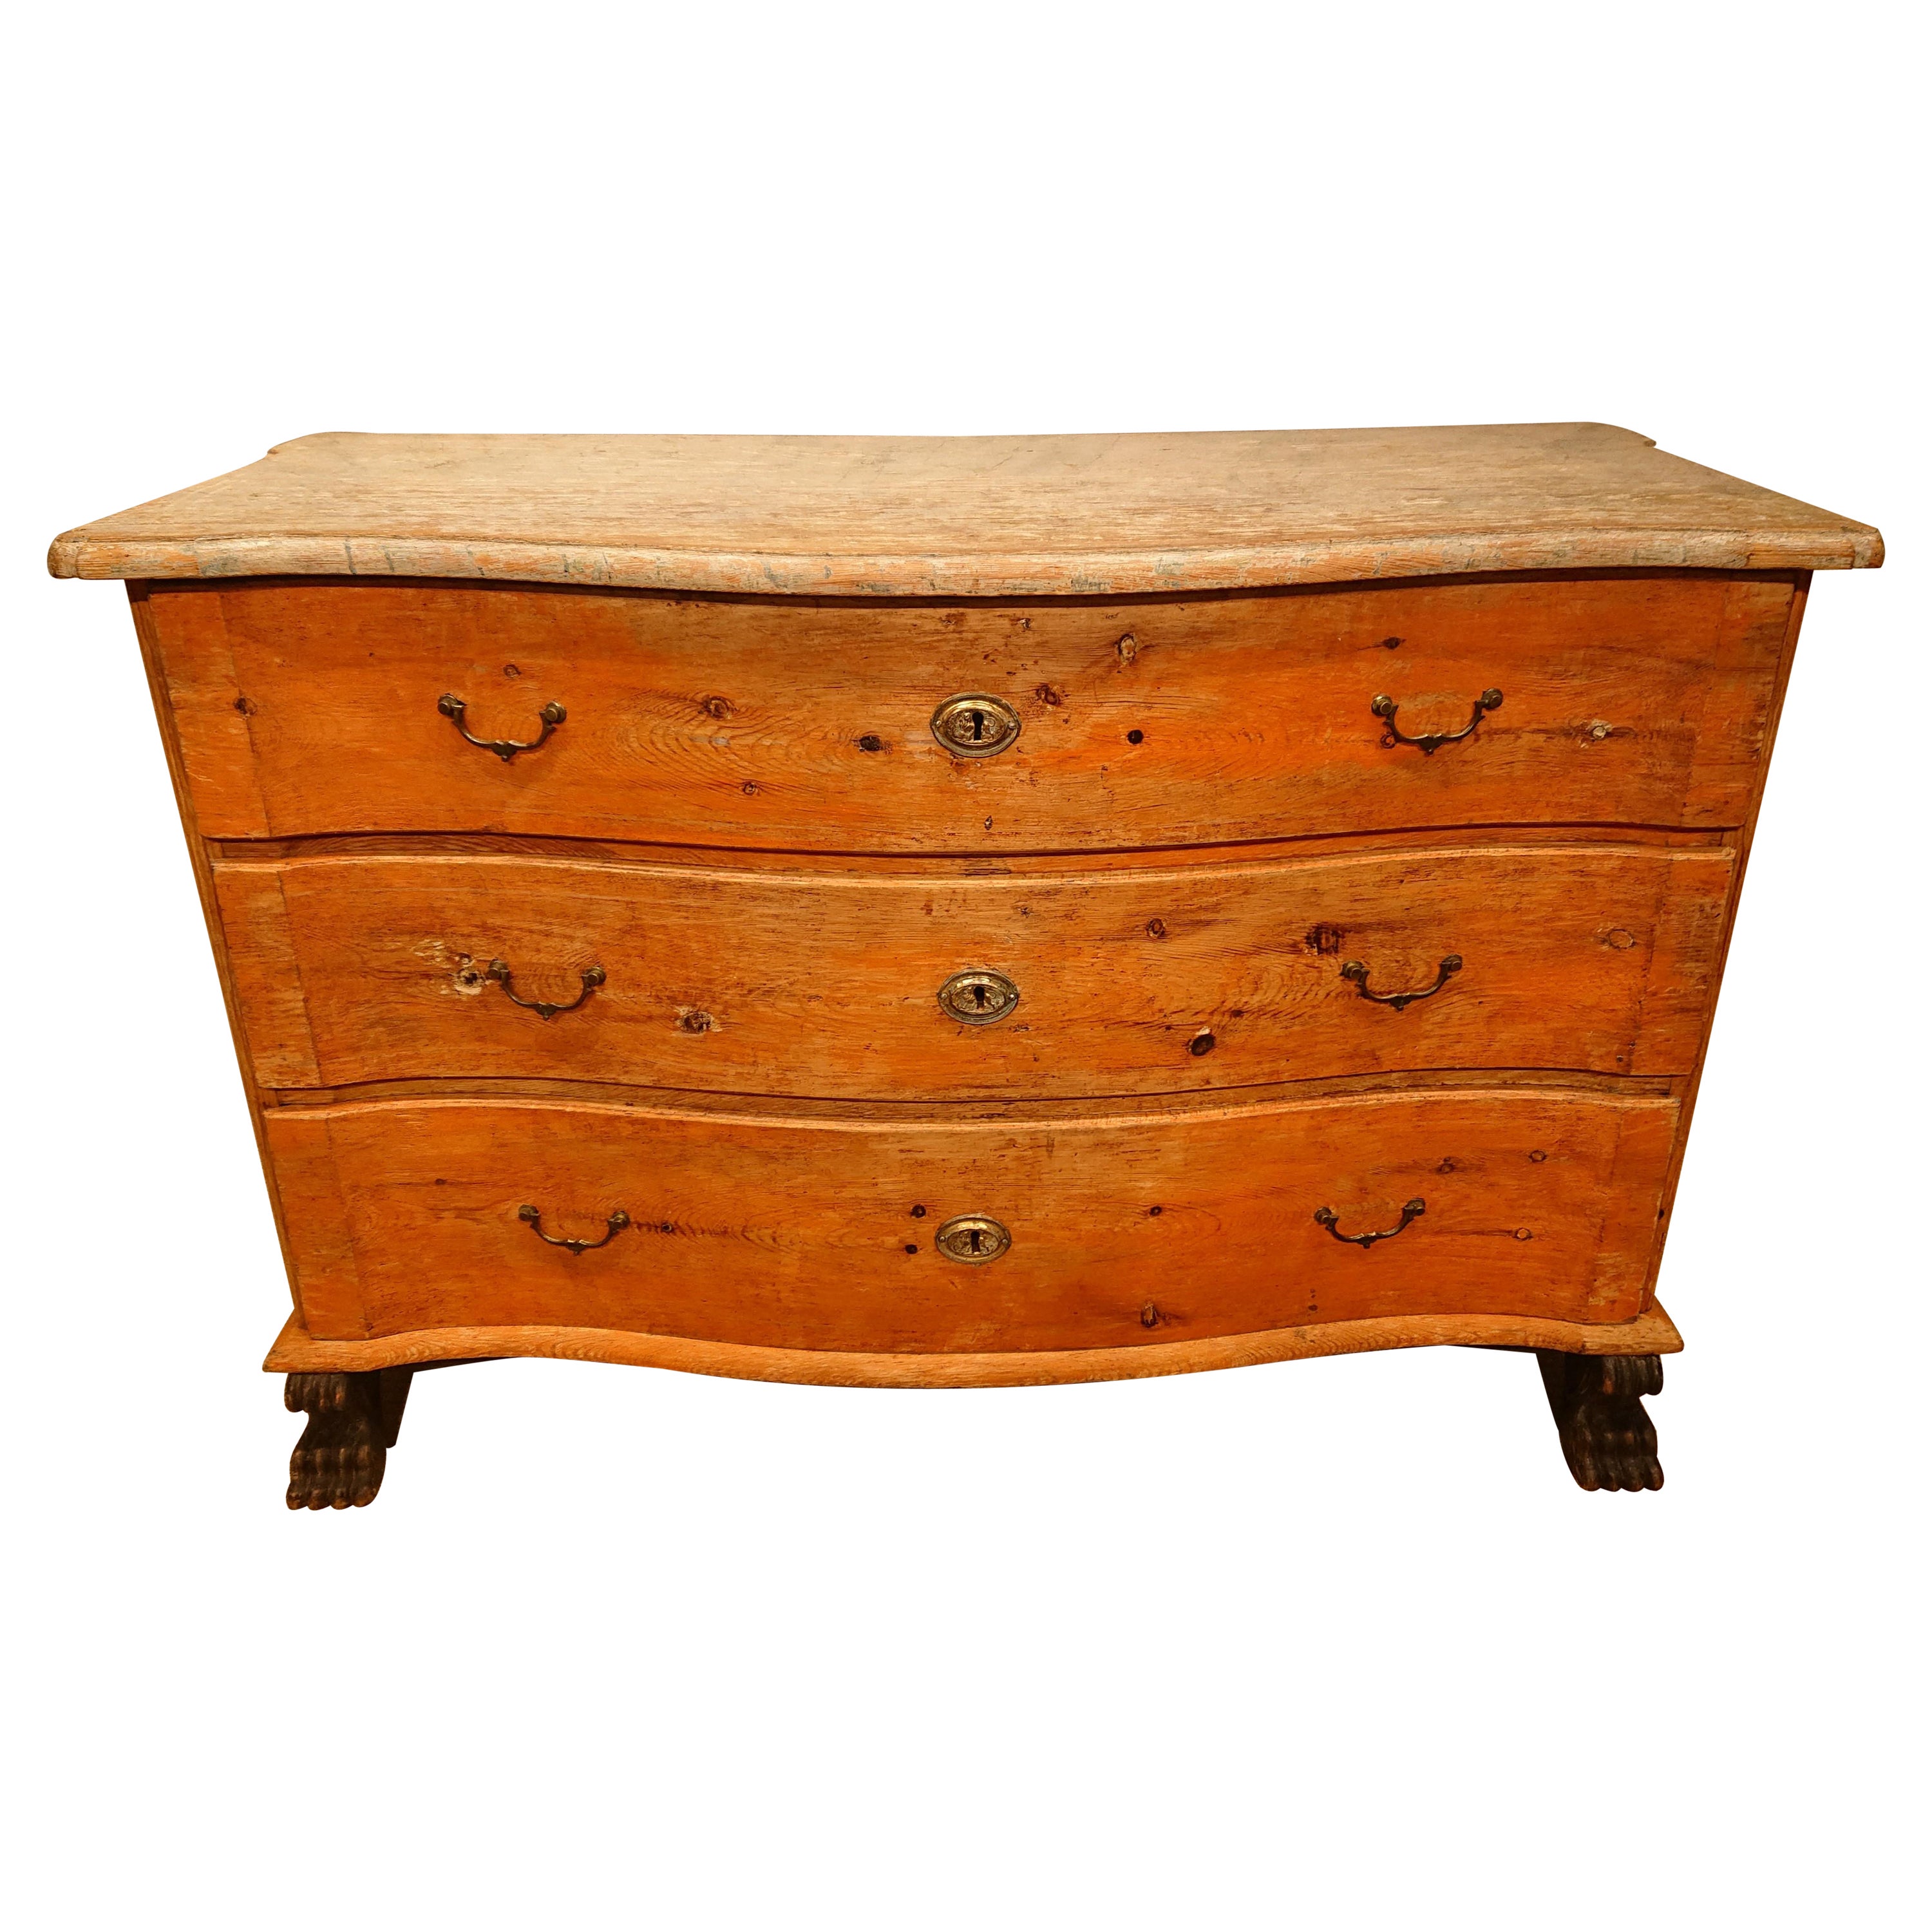 19th Century Swedish Style Late Baroque Chest of Drawers with Original Paint